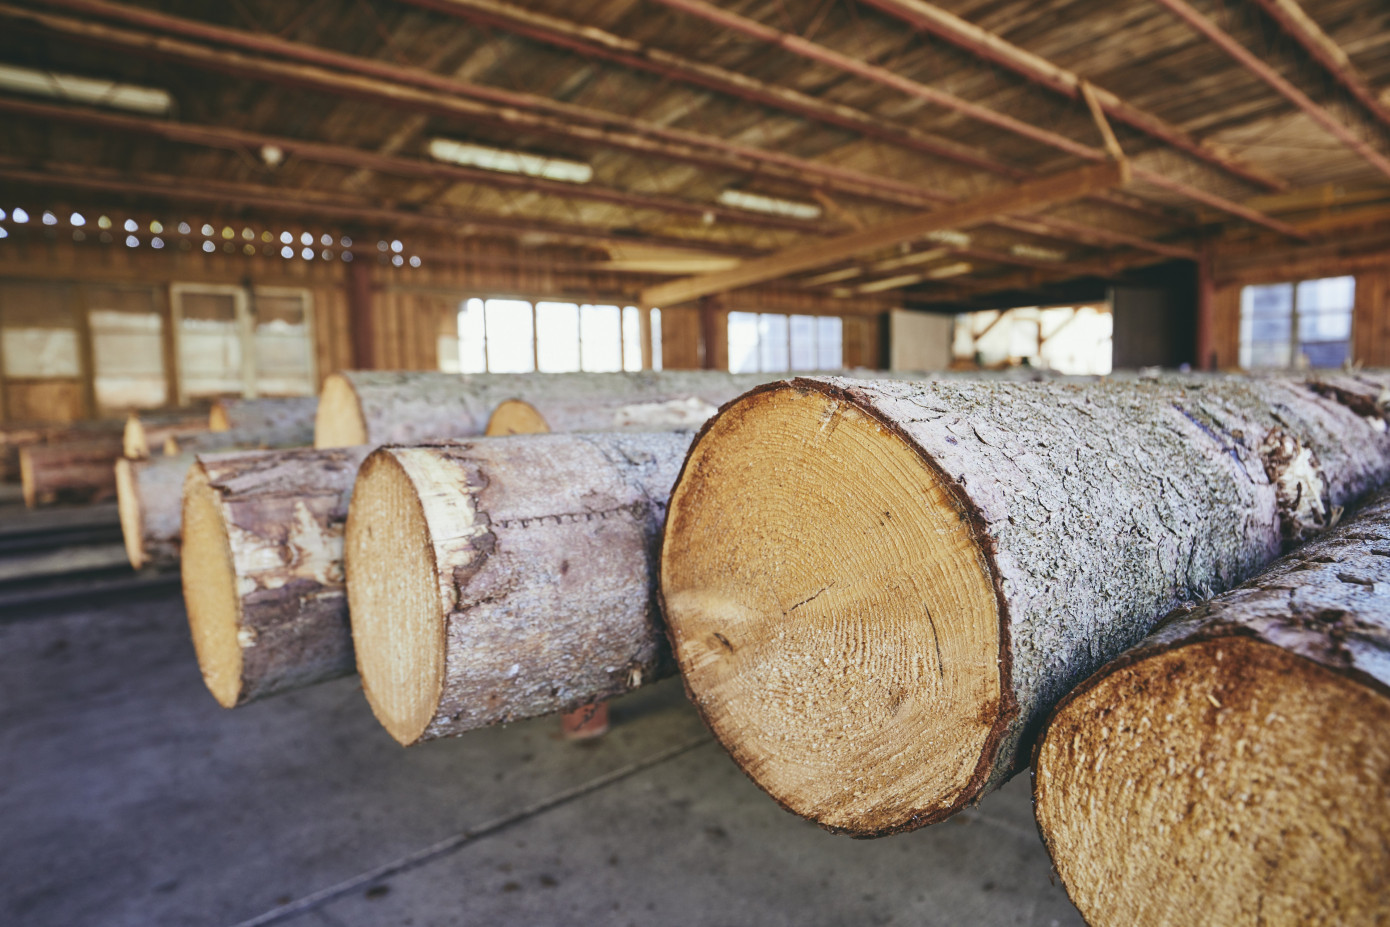 Exports of sawlog from Germany to China lose 32% in January